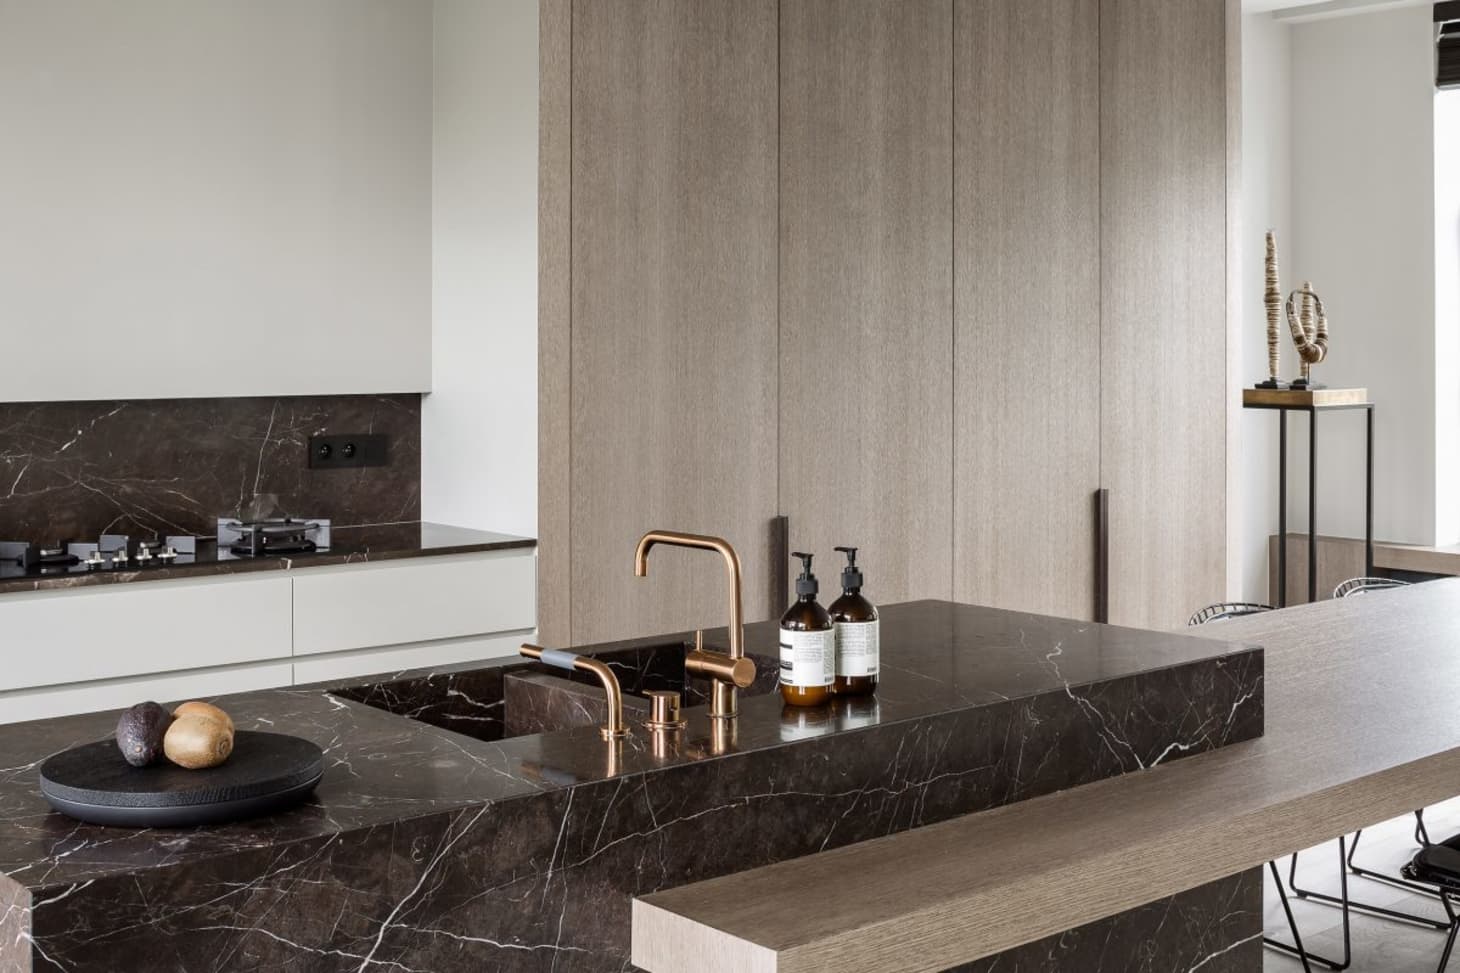 Kitchens With Black Marble Apartment Therapy